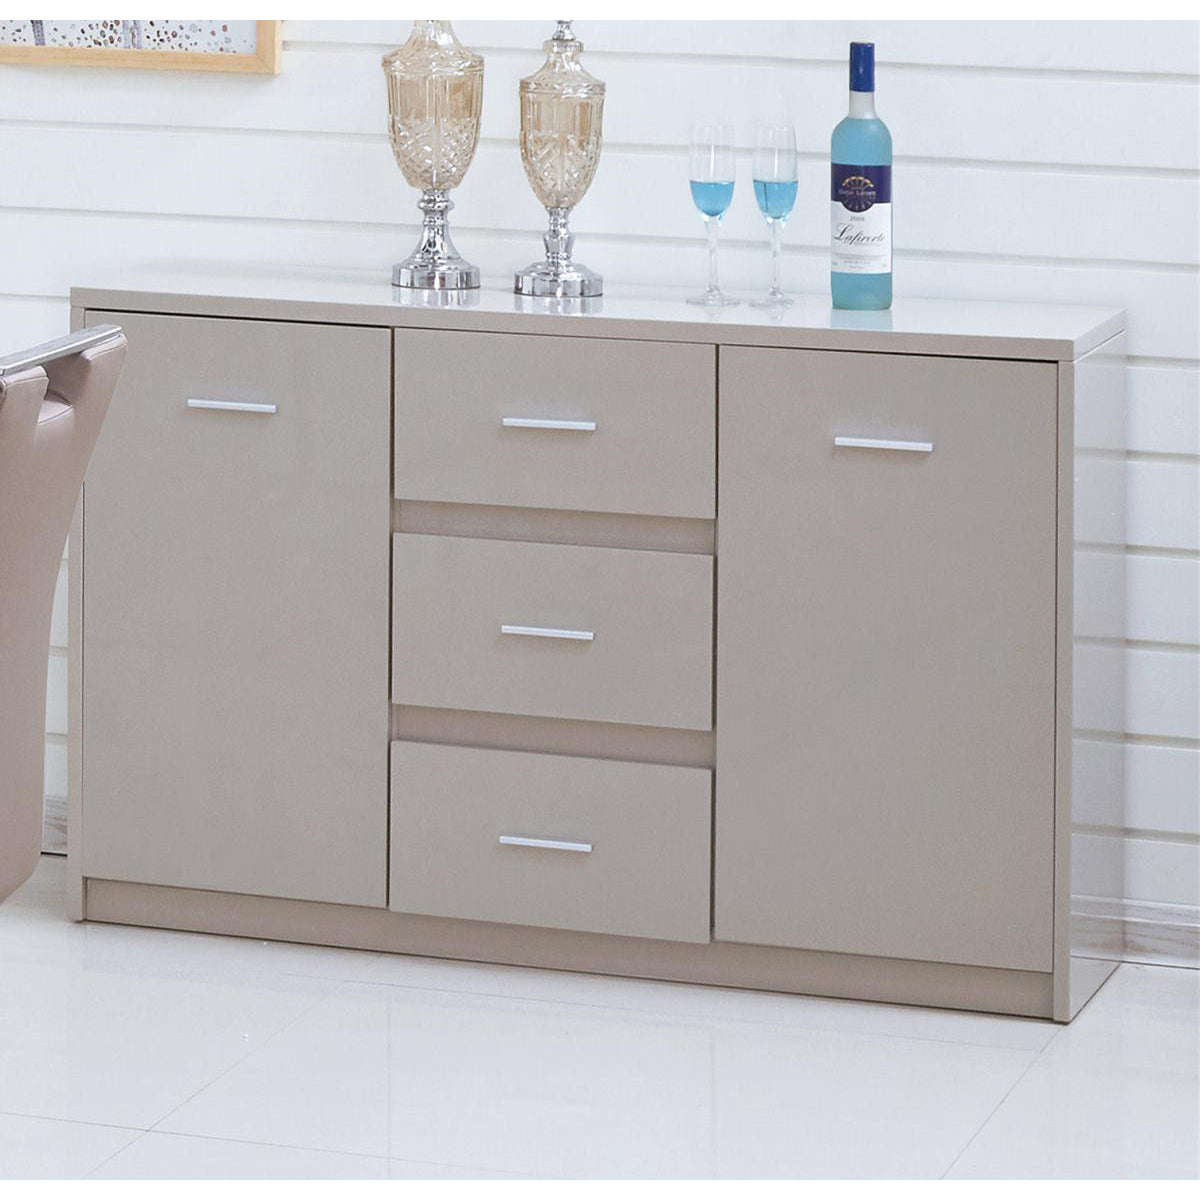 Ashpinoke:Rembrock High Gloss Sideboard Champagne-Sideboards and Displays-Heartlands Furniture